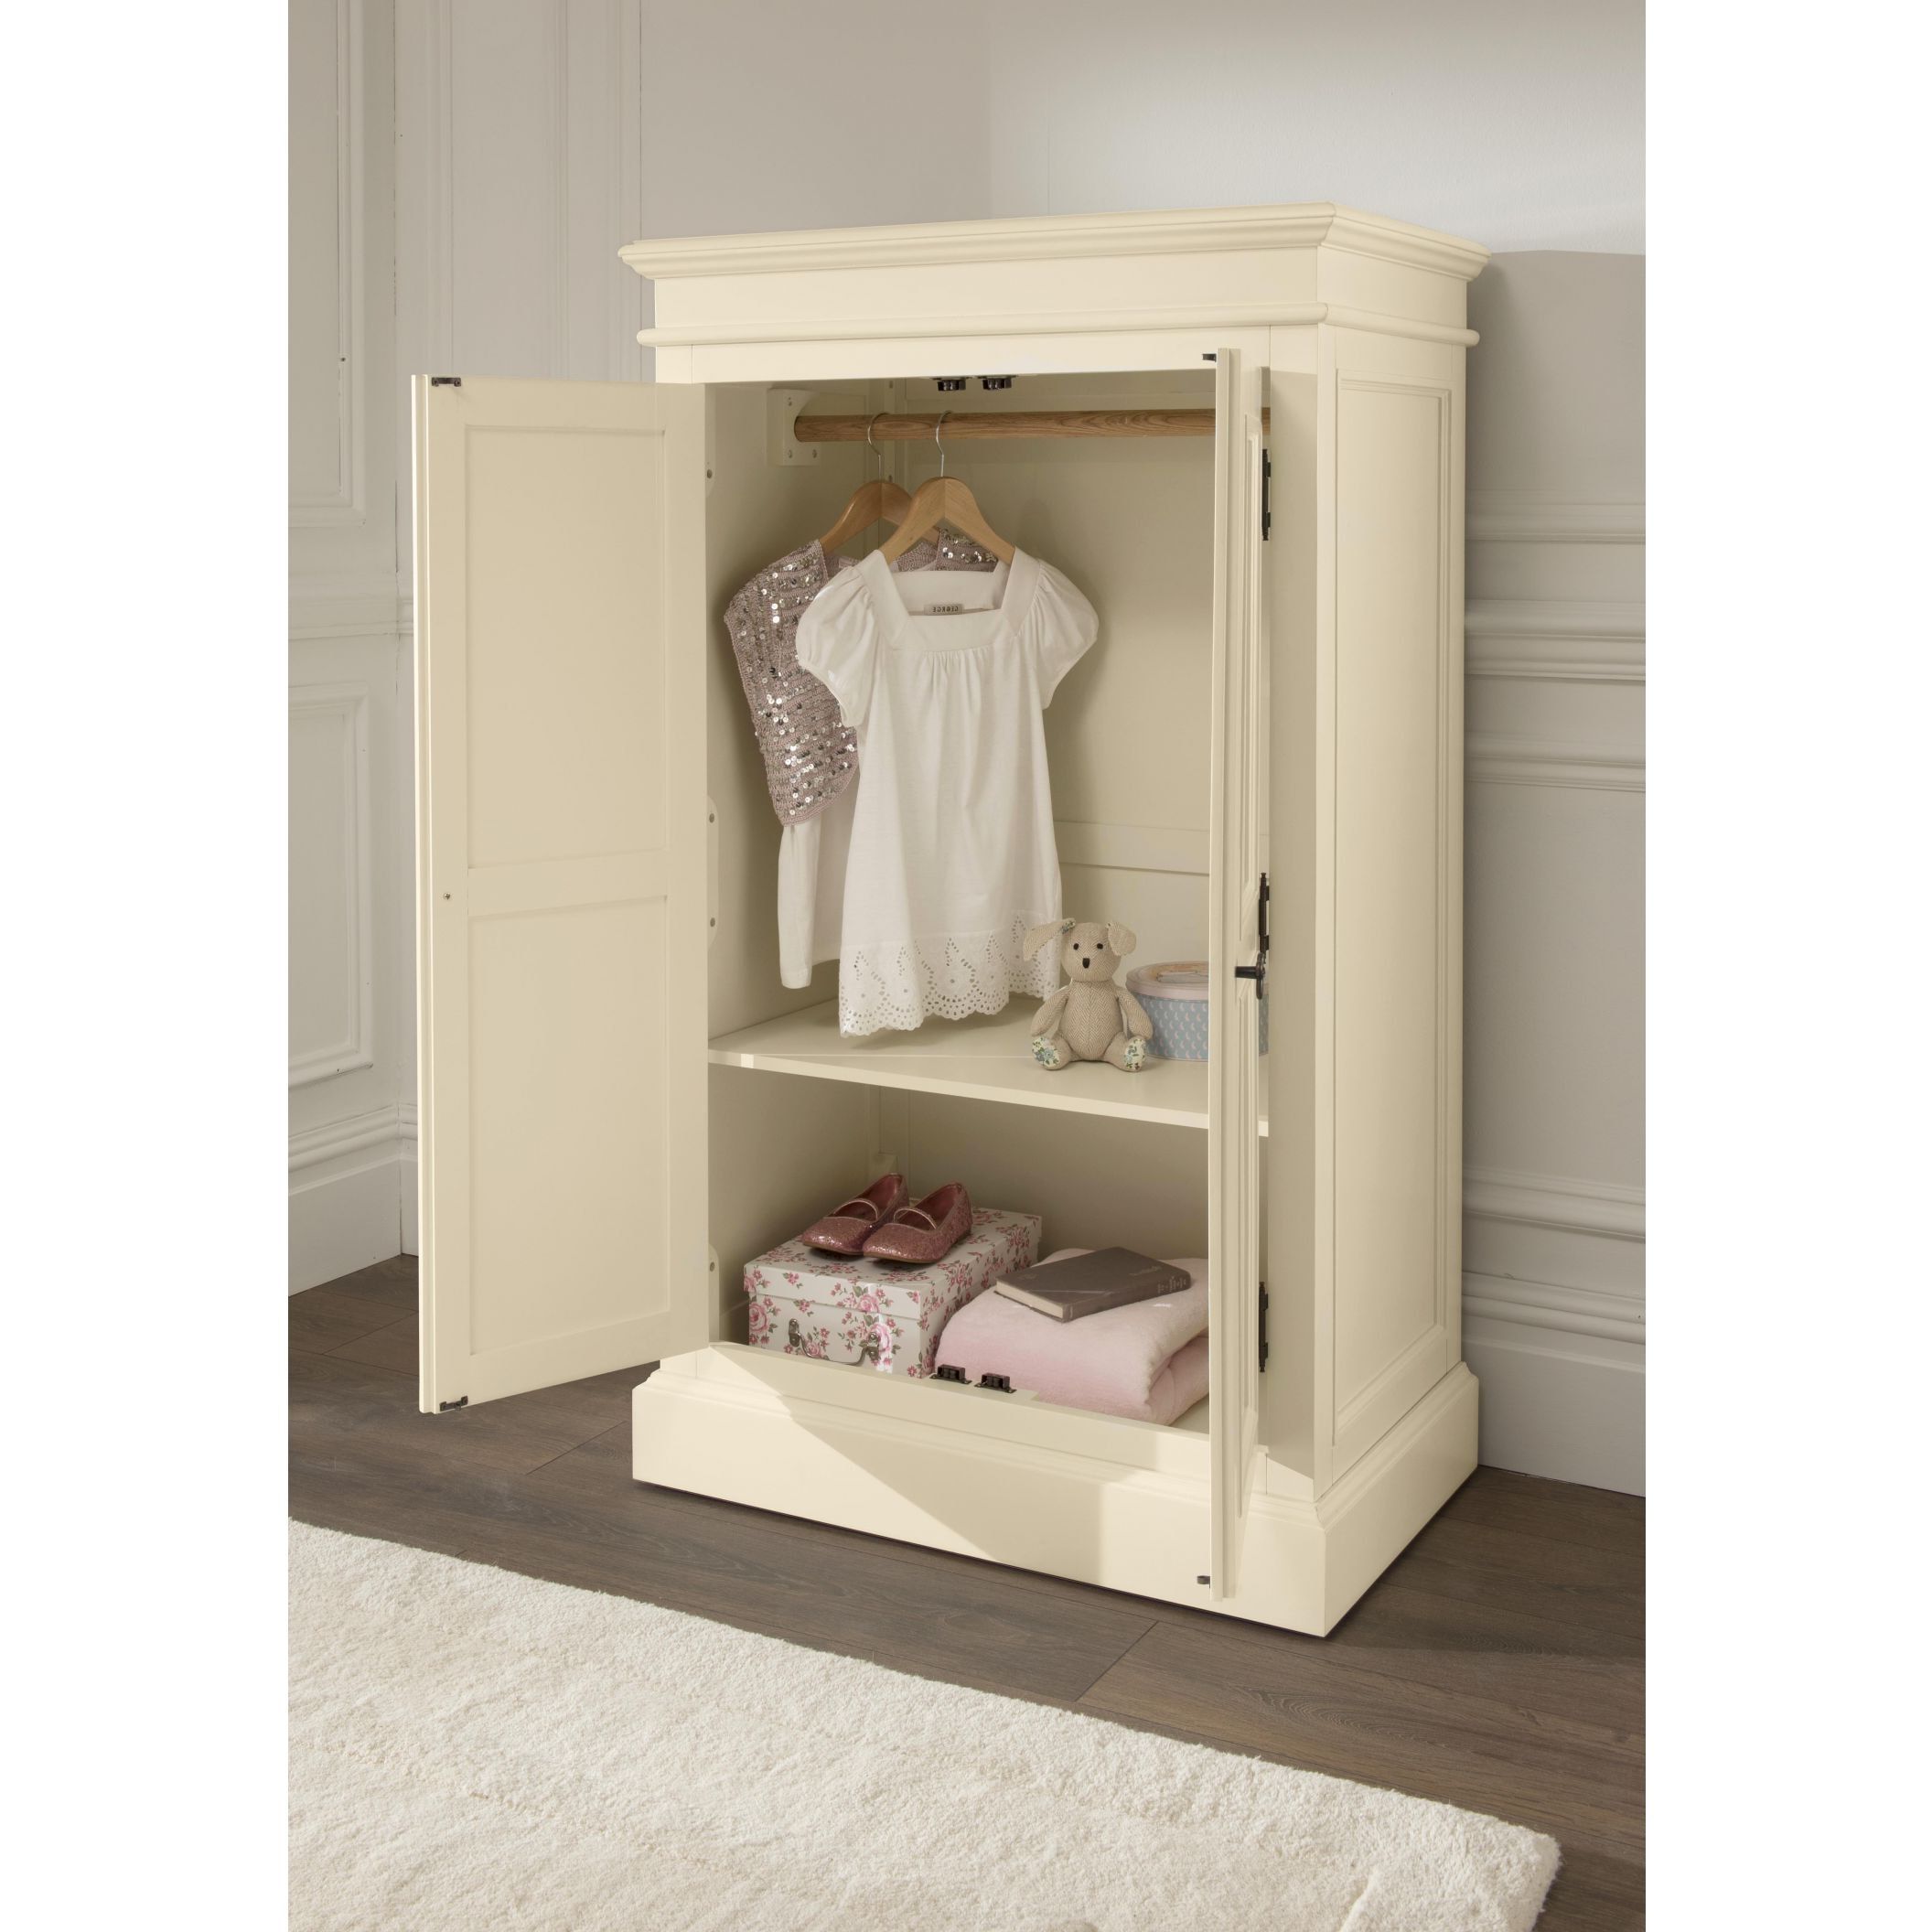 Brittany Shabby Chic Small Wardrobe Throughout Small Wardrobes (View 16 of 20)